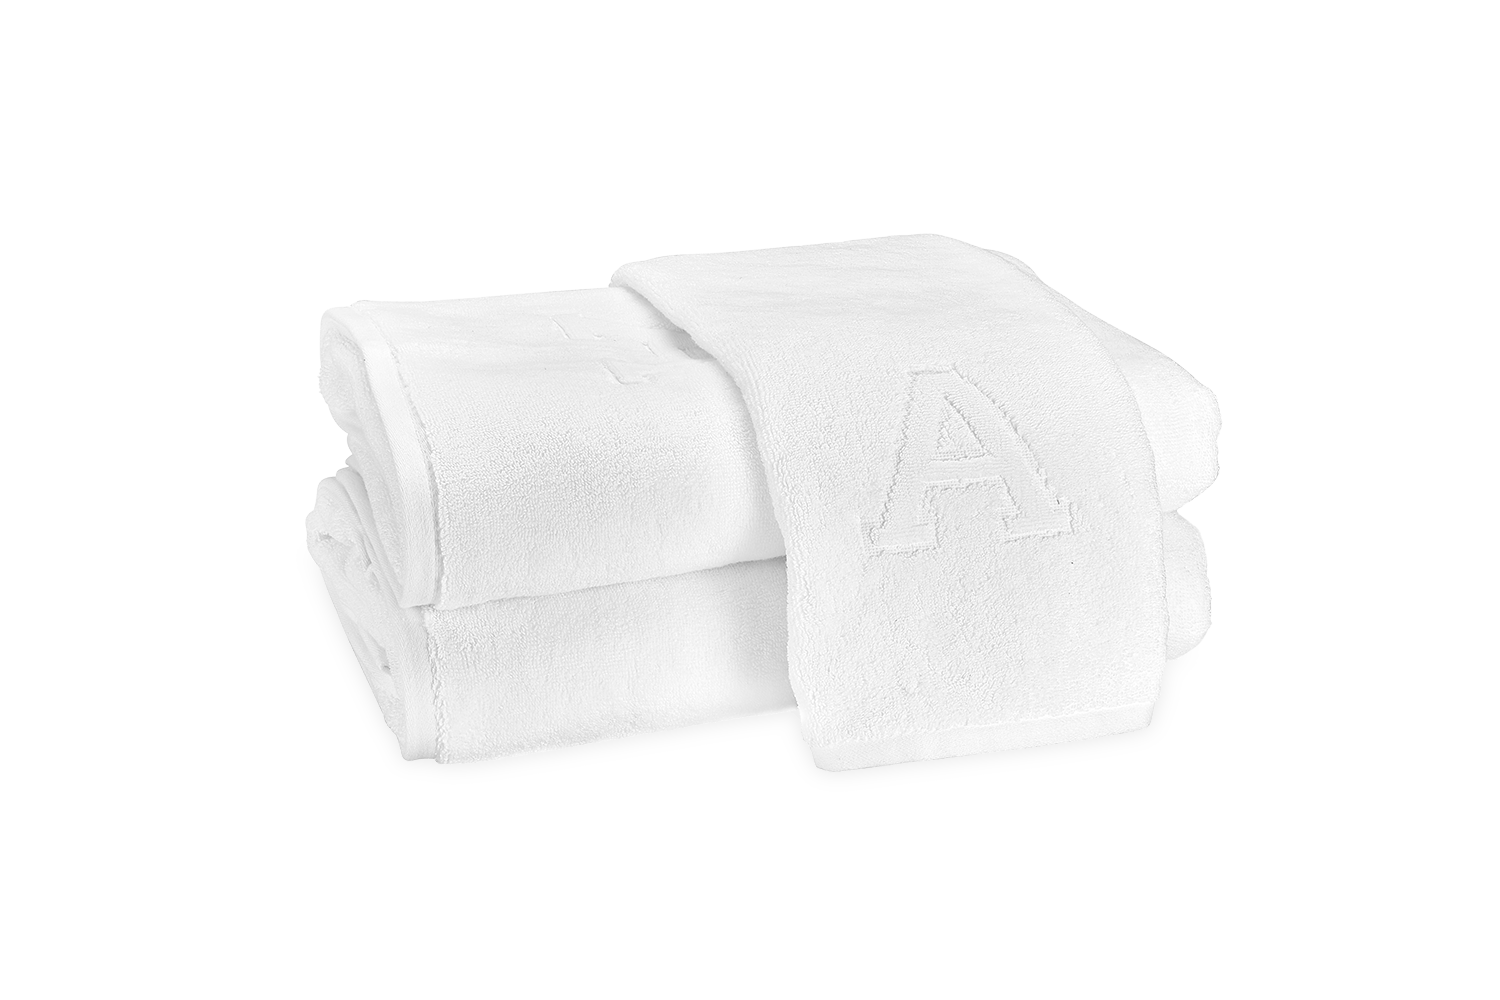 https://matouk-website.imgix.net/spree/products/4281/original/auberge_towels_A_primary.png?1549395352